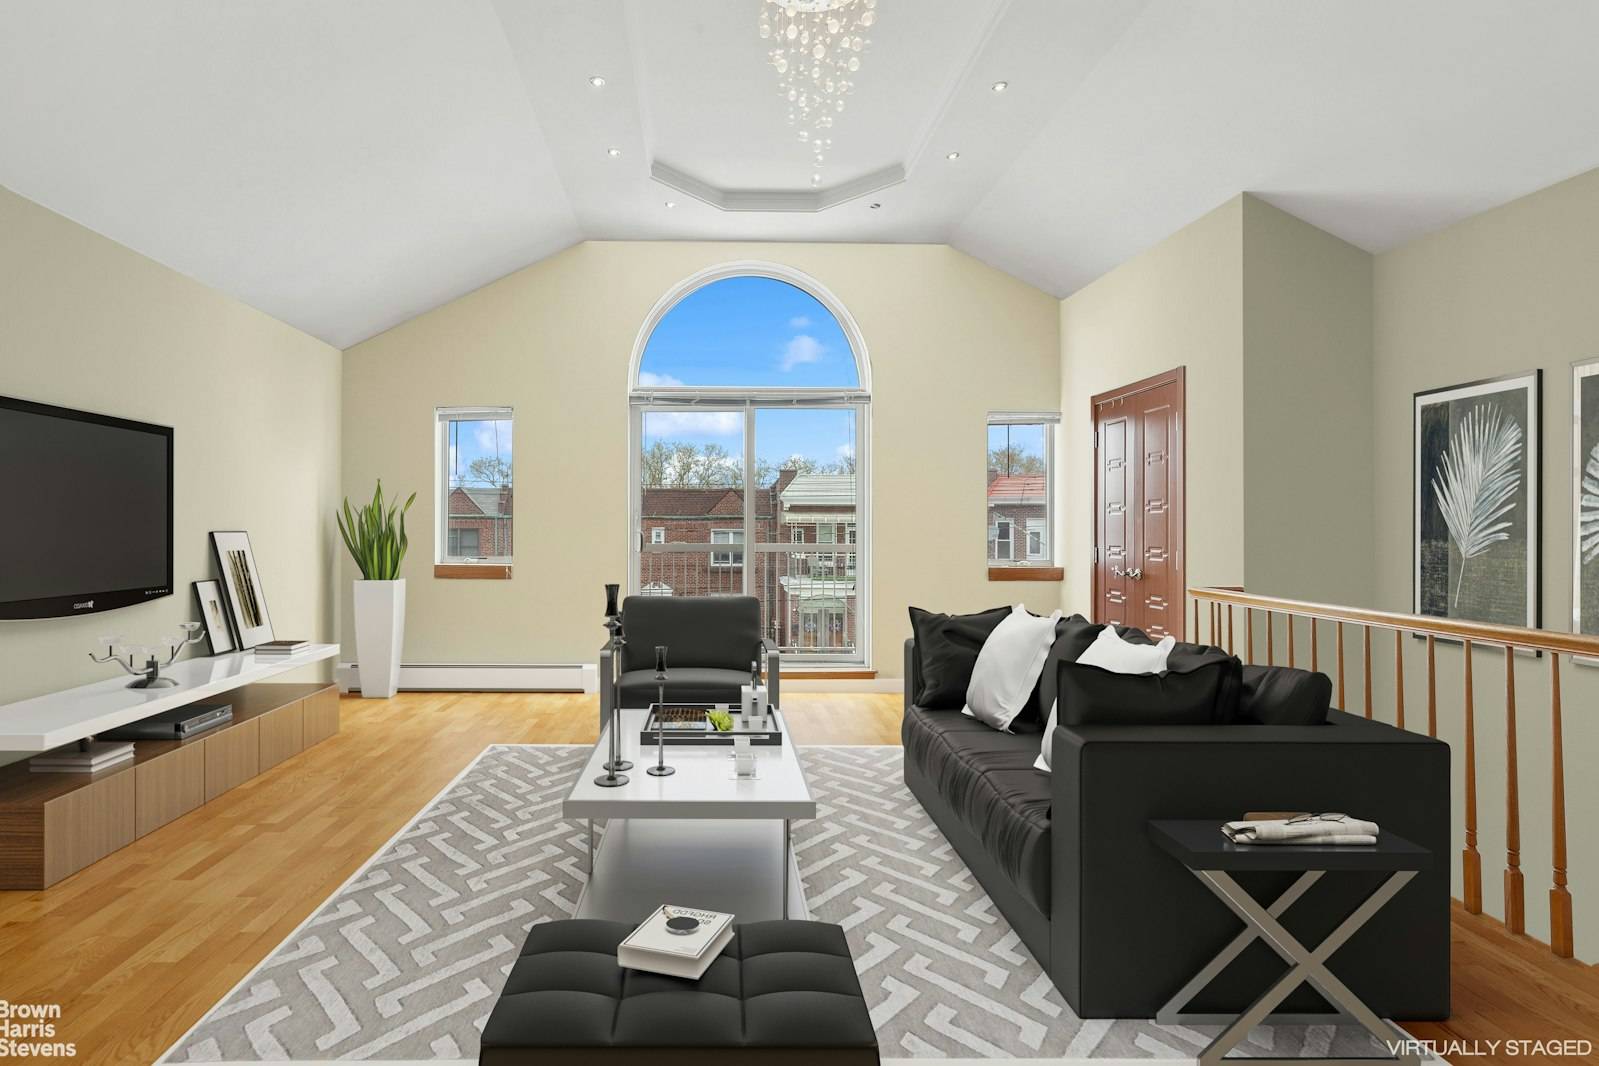 Situated in the coveted Dyker Heights neighborhood, this exceptional semi detached brick condominium boasts a spacious top floor unit featuring four bedrooms and three bathrooms.